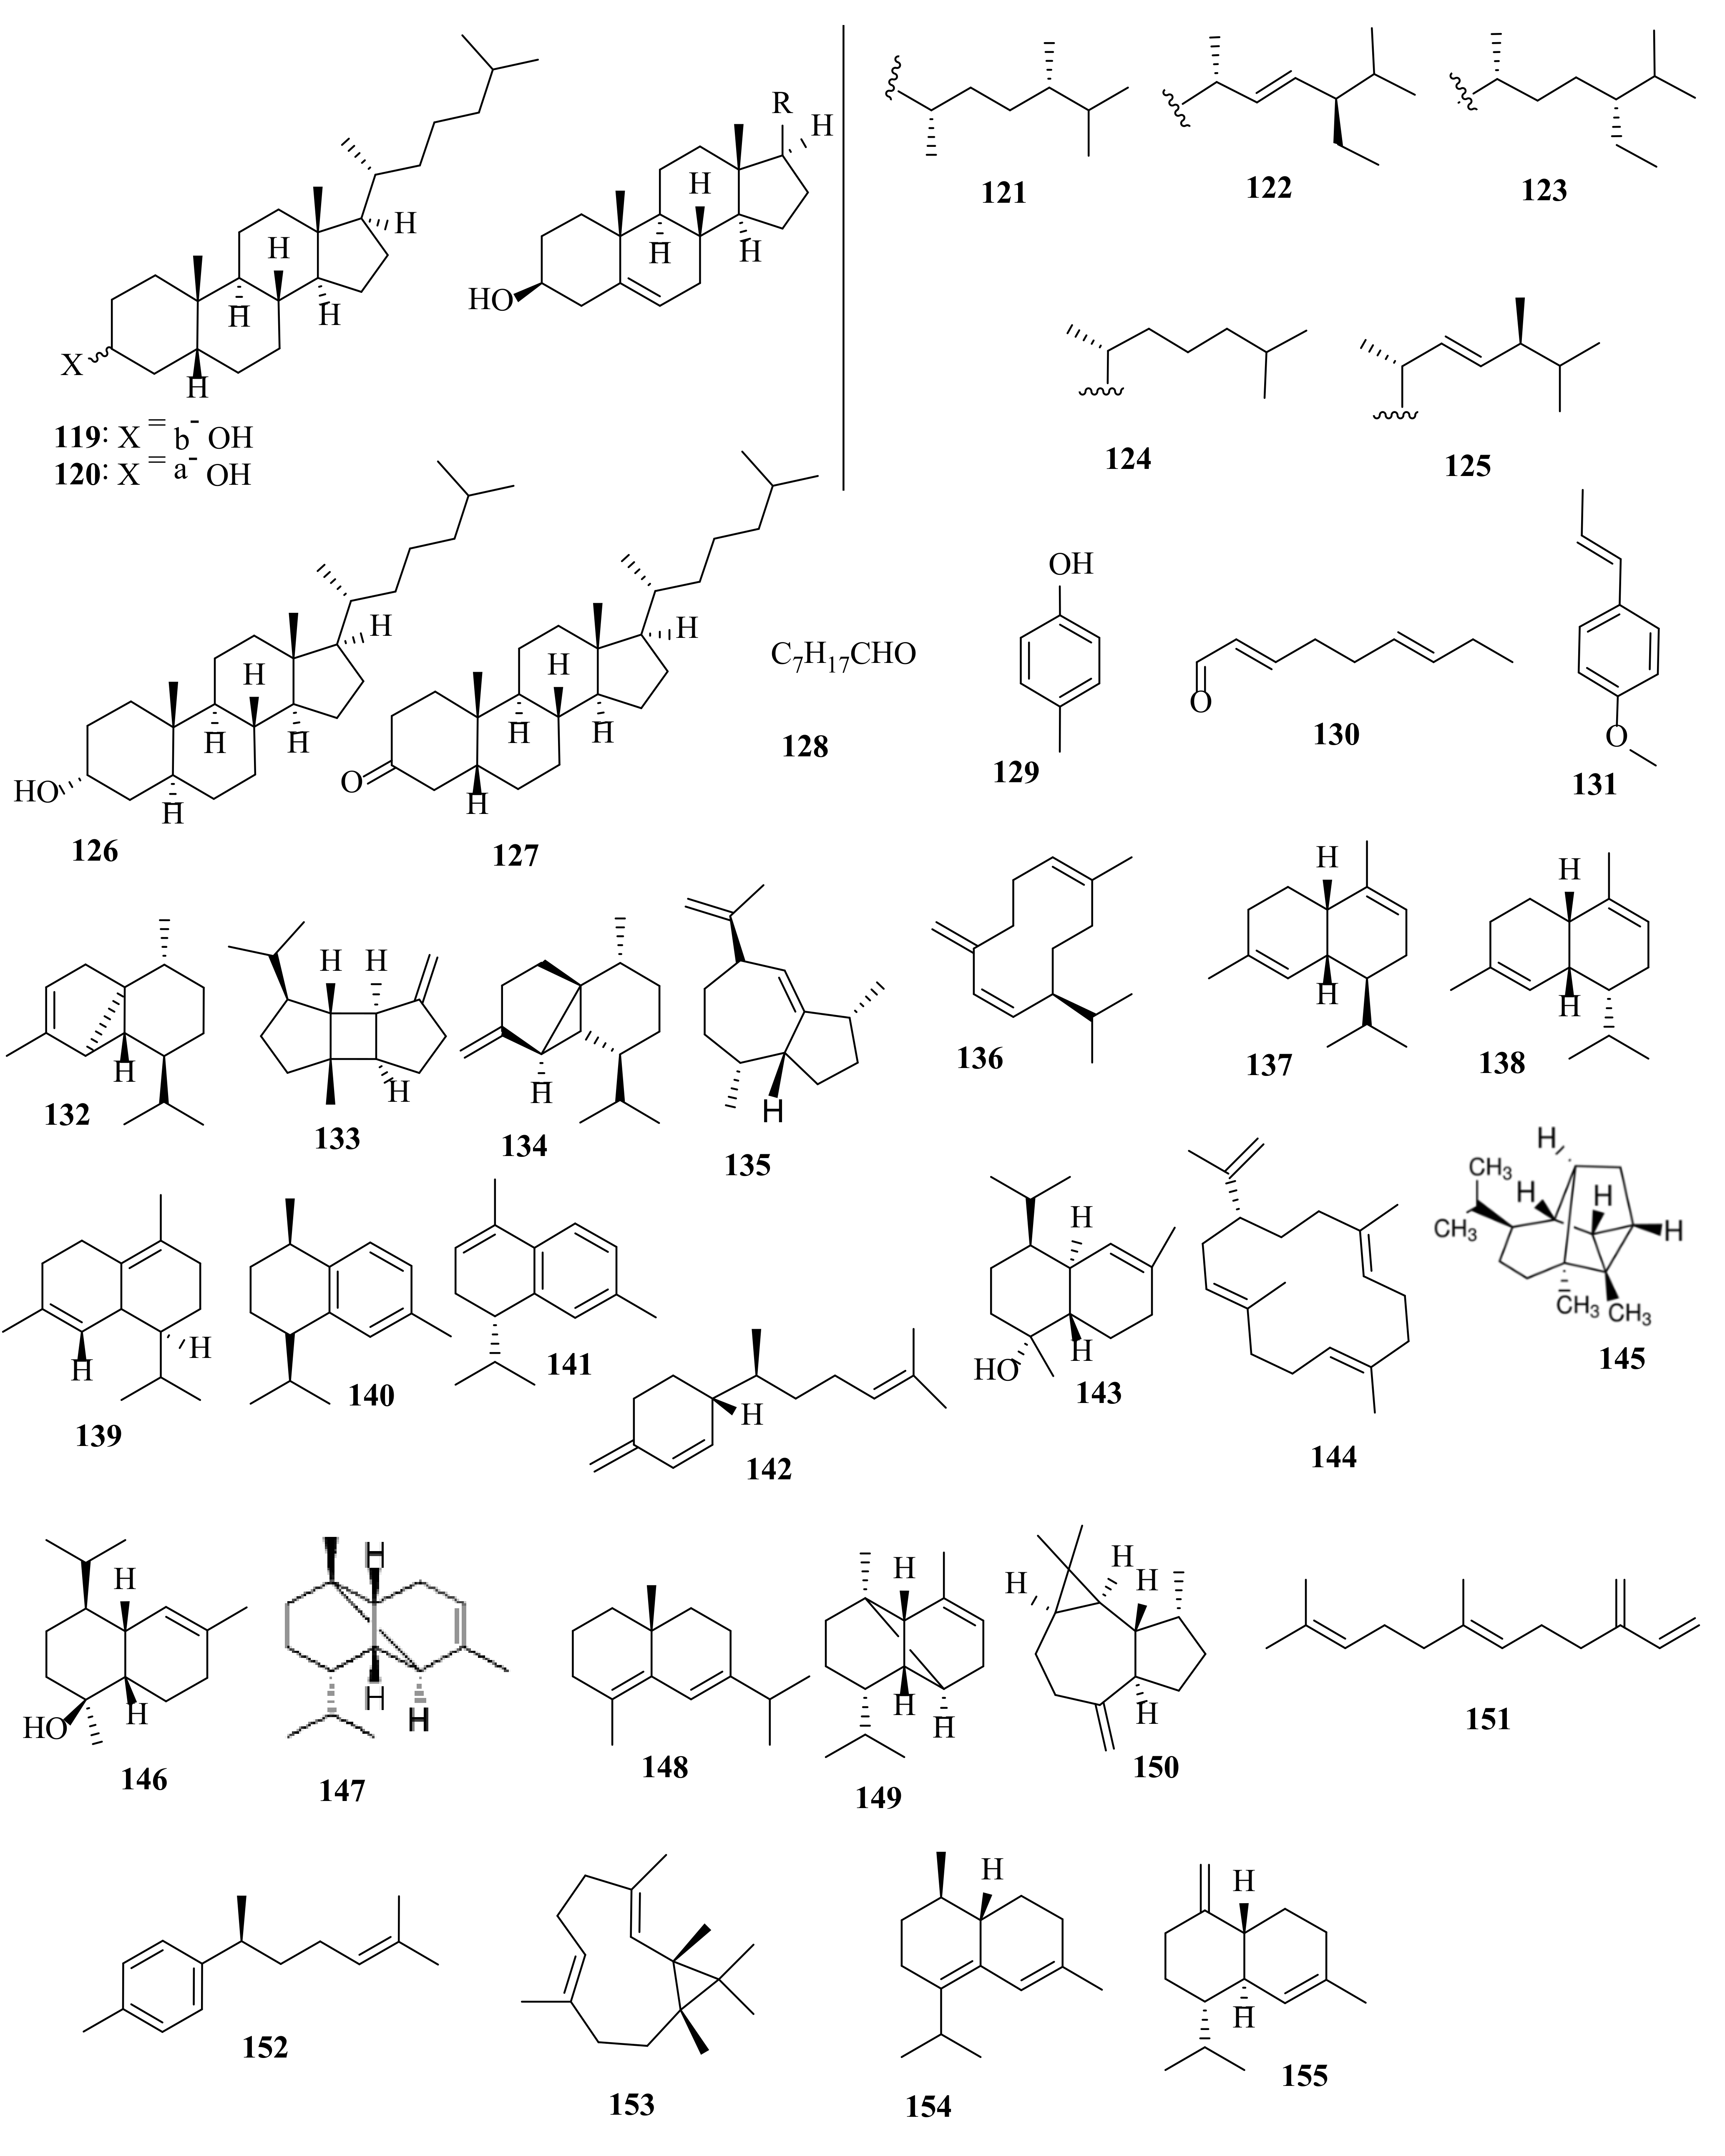 Molecules Free Full Text The Biodiversity Of The Genus Dictyota Phytochemical And Pharmacological Natural Products Prospectives